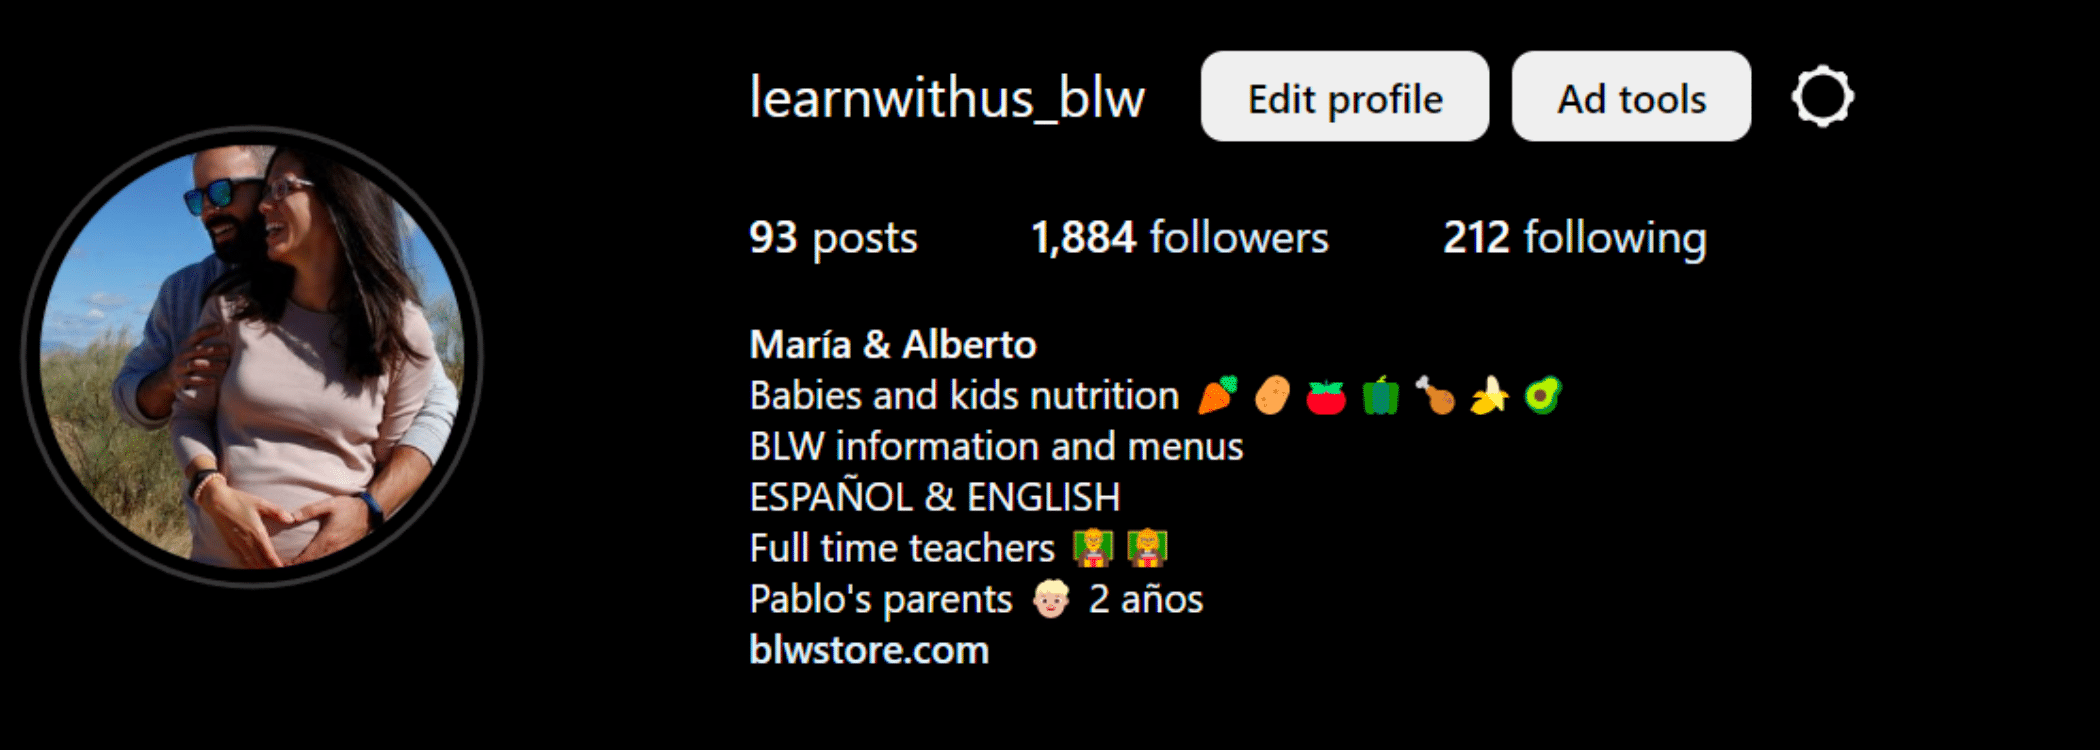 Baby-led-weaning-Instagram-account-@learnwithus_blw